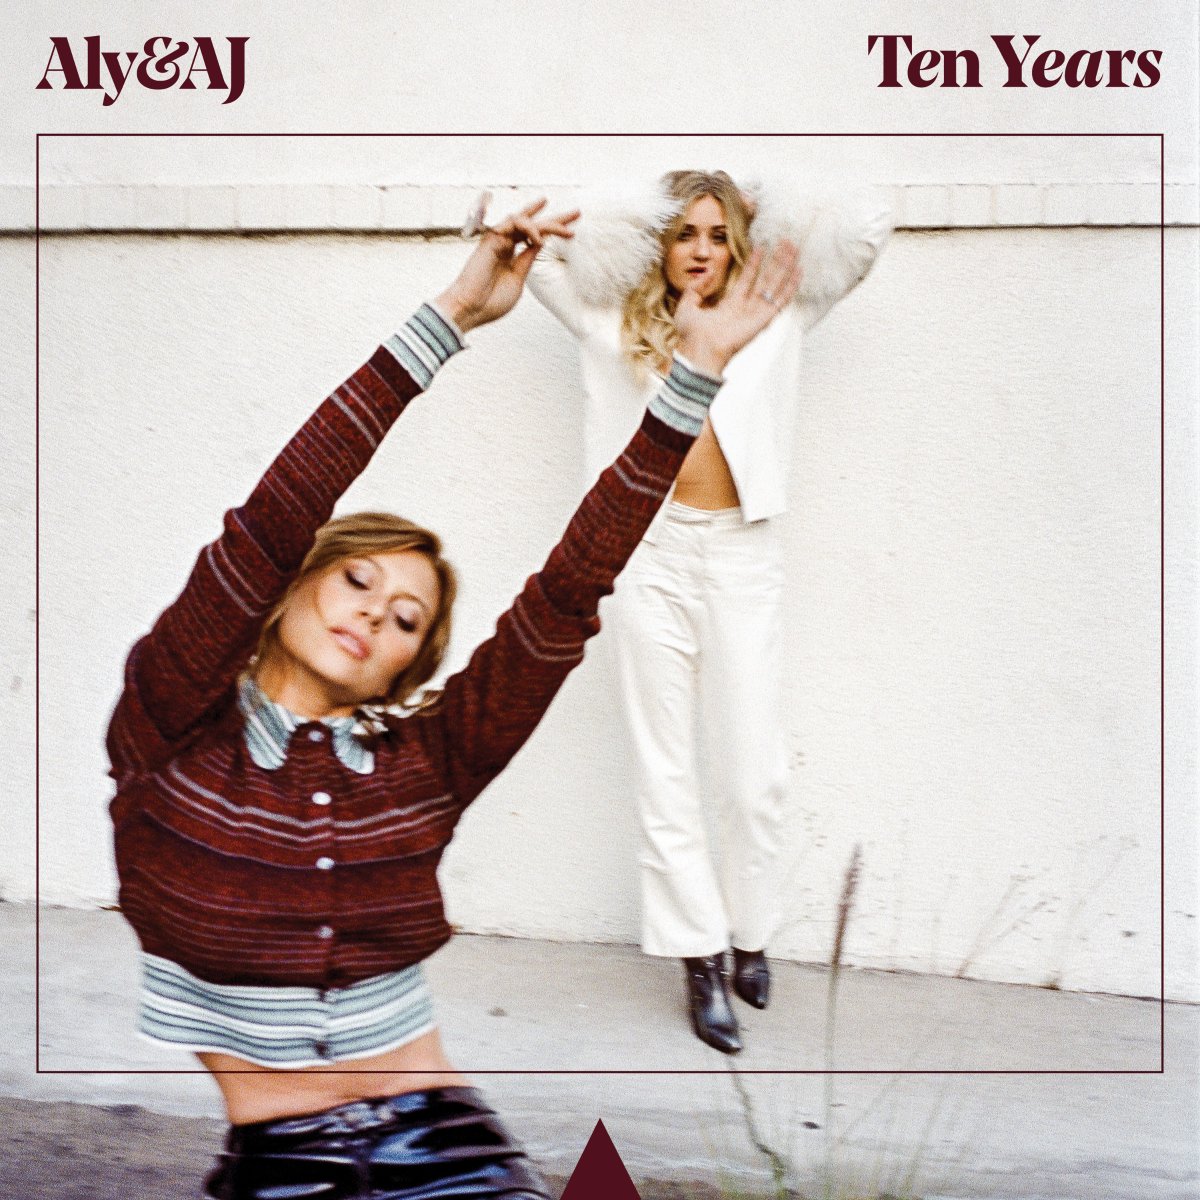 Aly and aj show